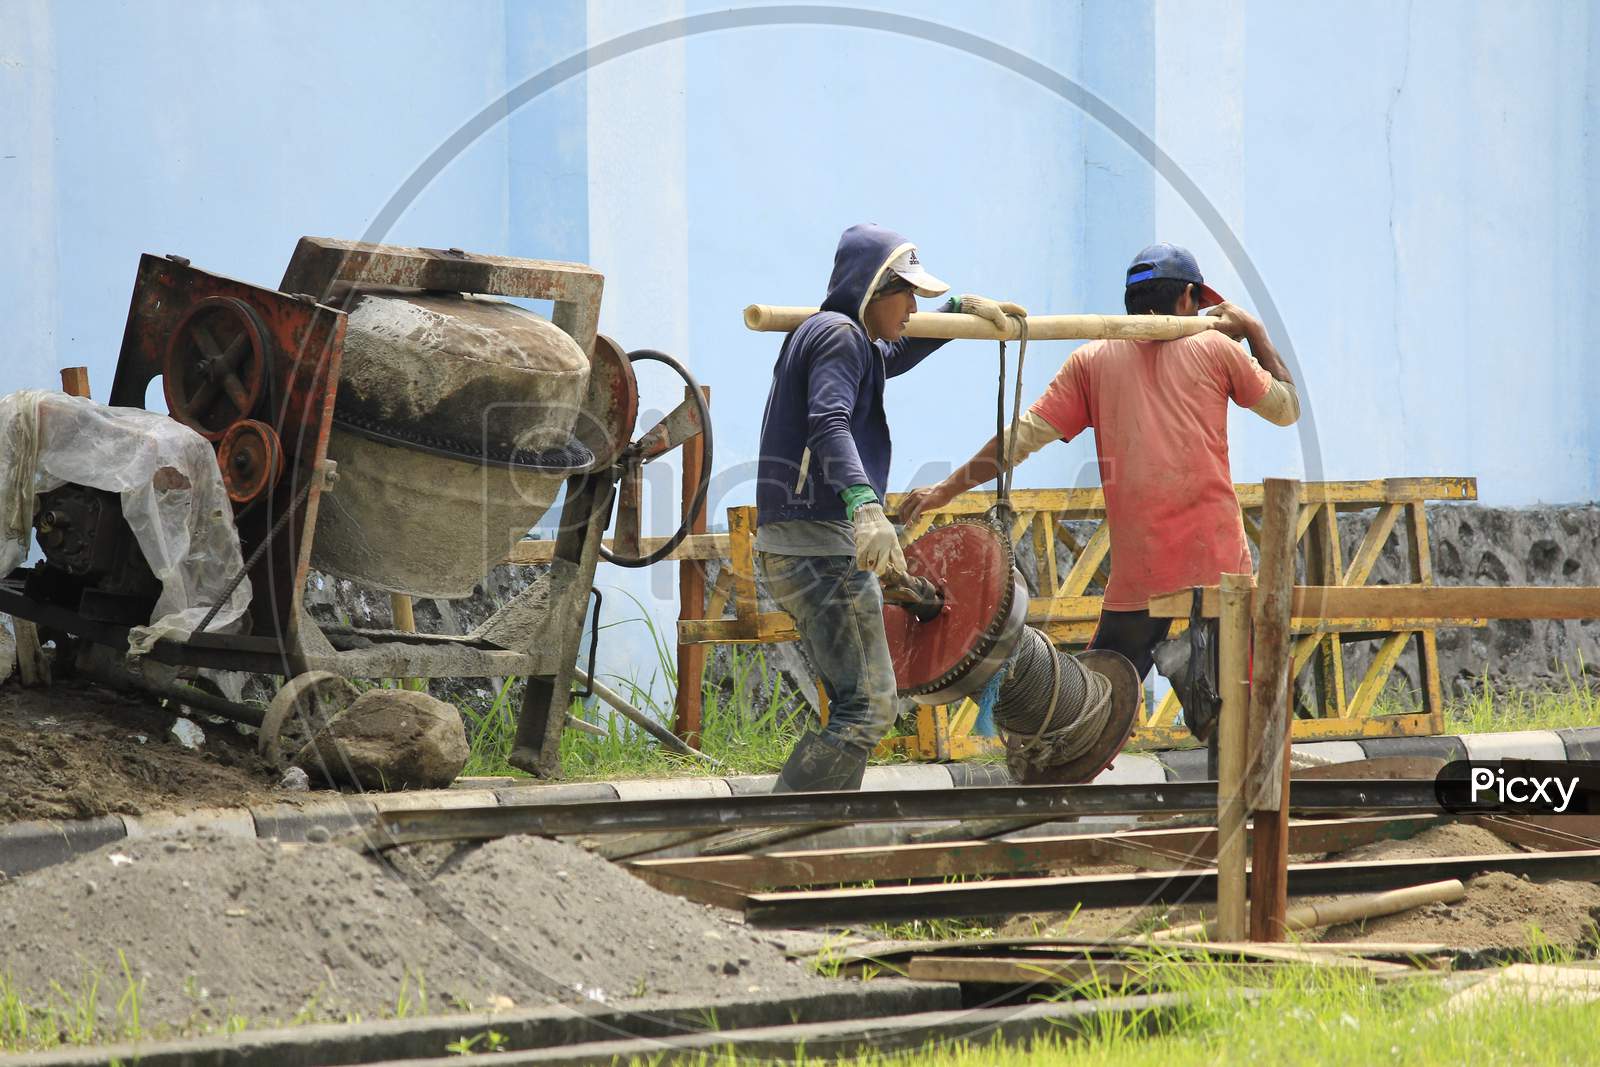 Two construction workers work together to lift steel wire reels